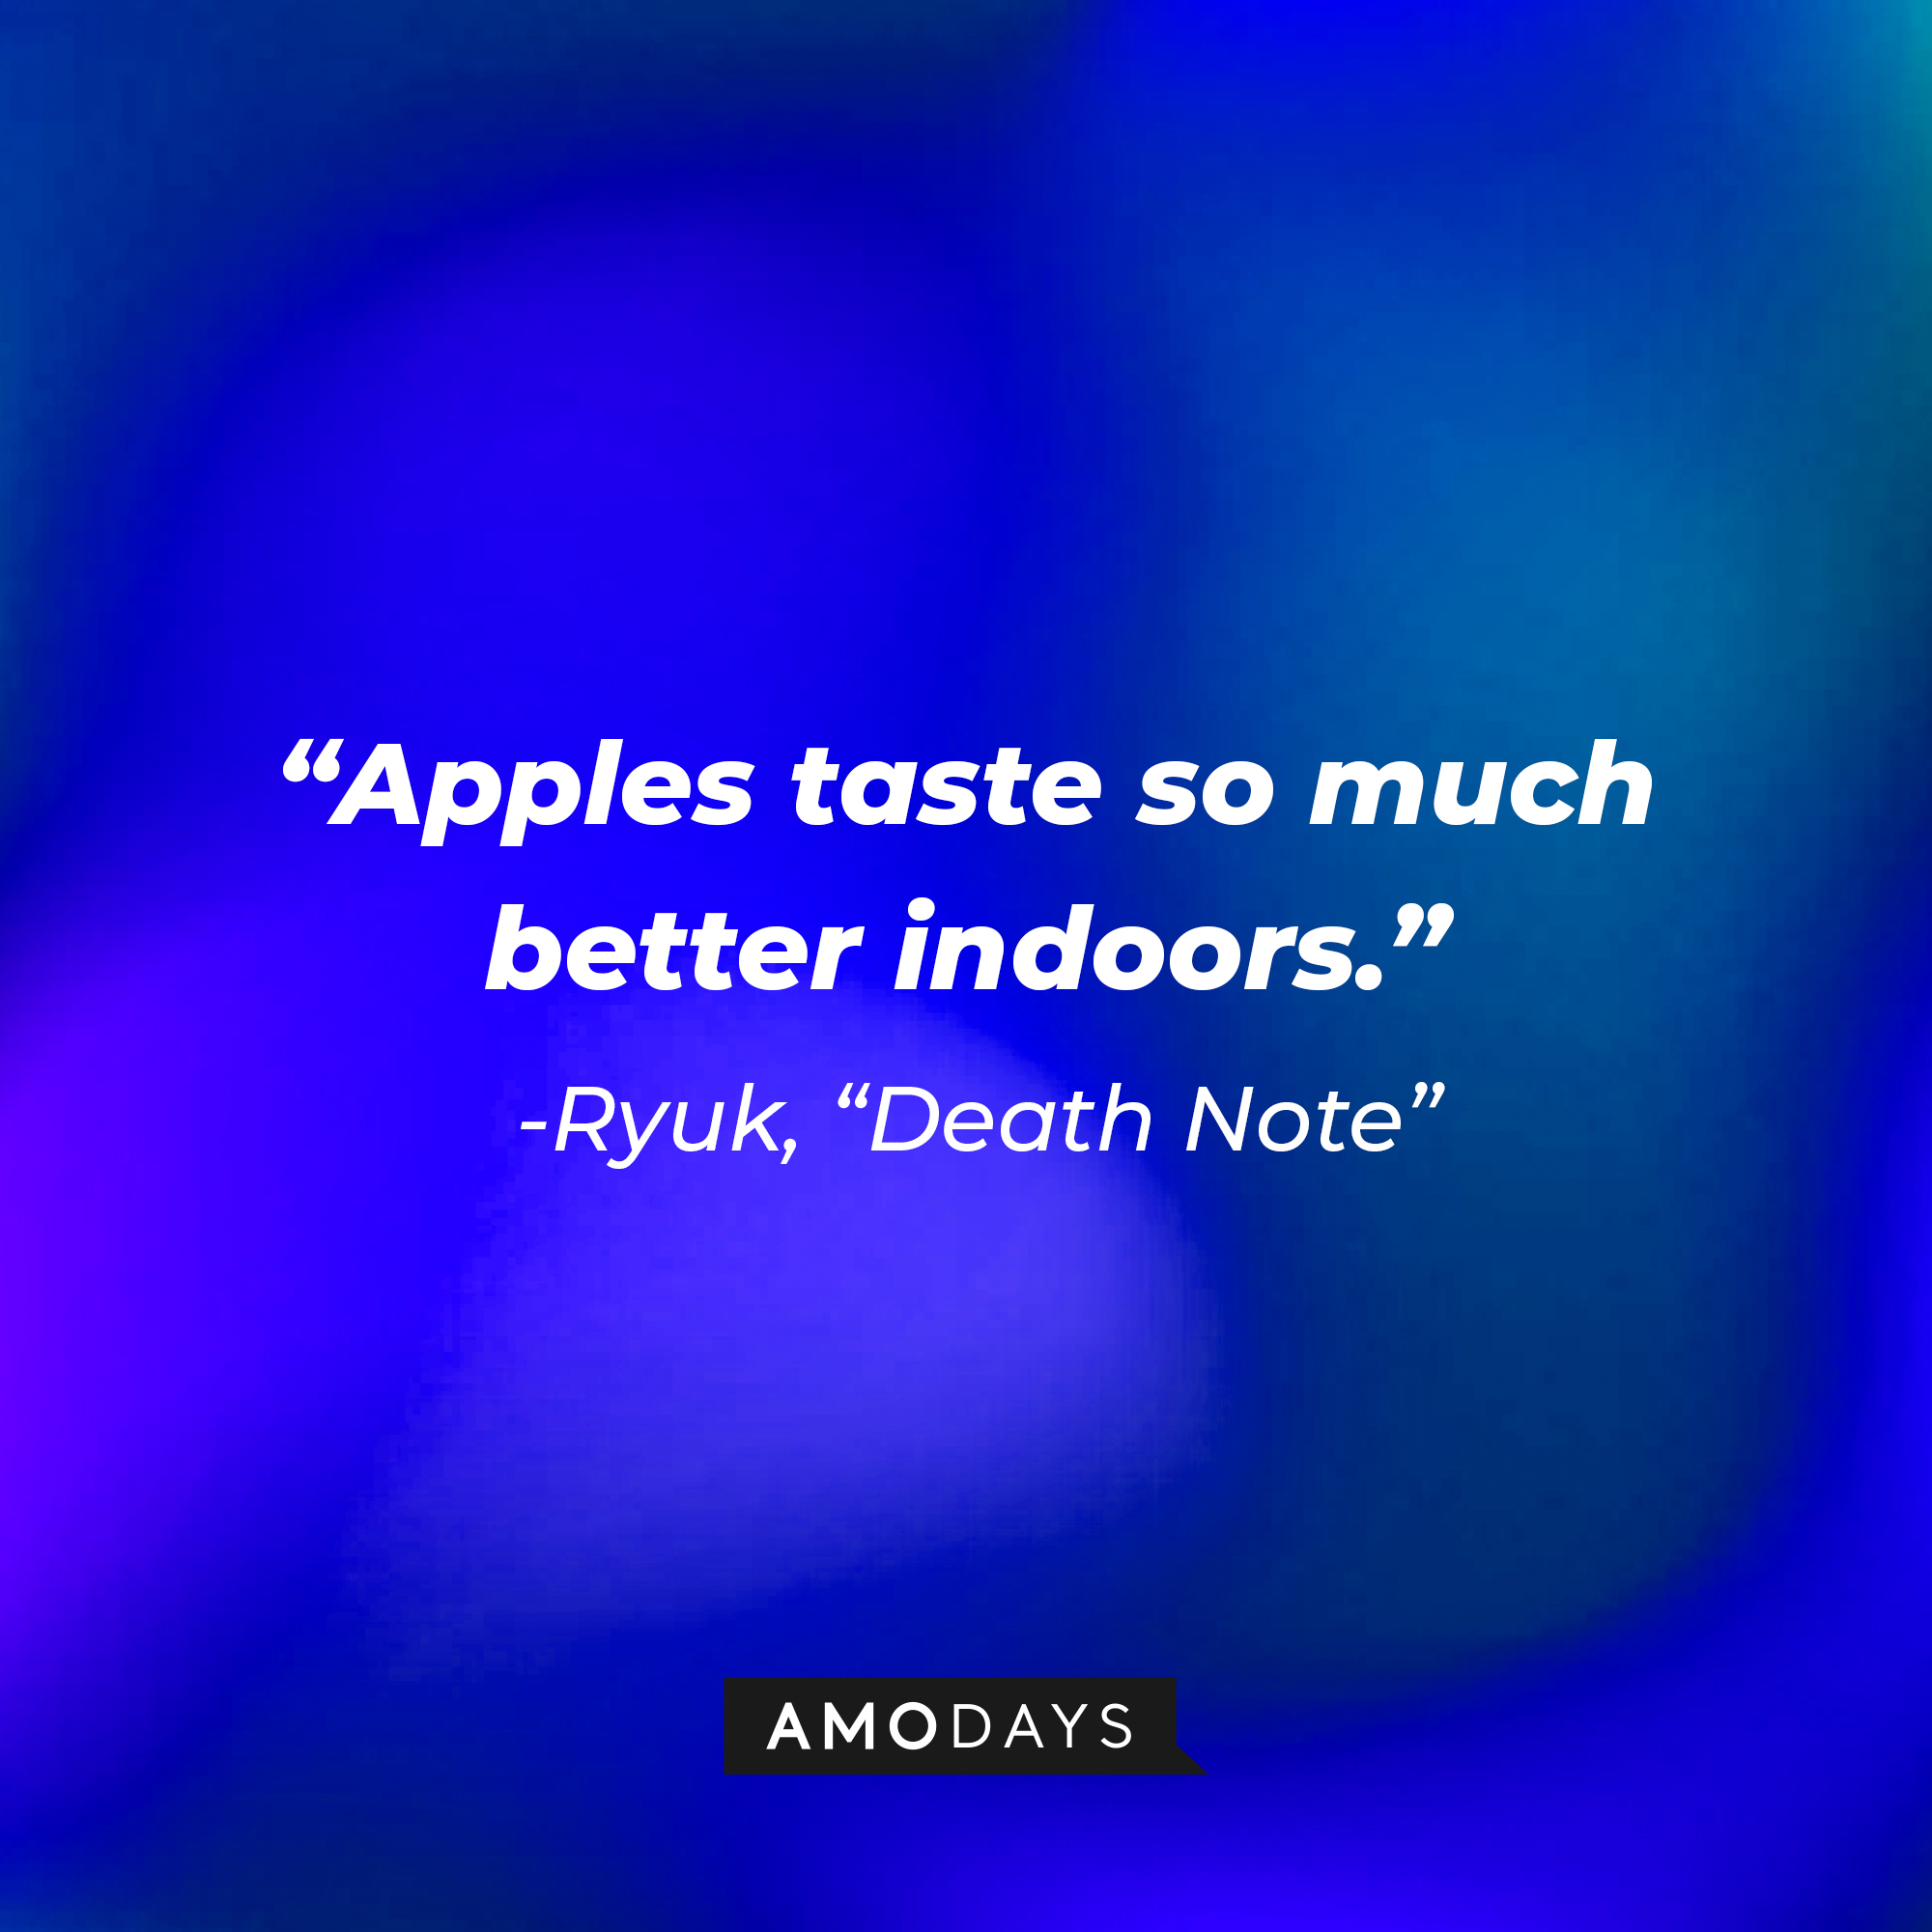 Ryuk's quote from "Death Note:" "Apples taste so much better indoors." | Source: AmoDays